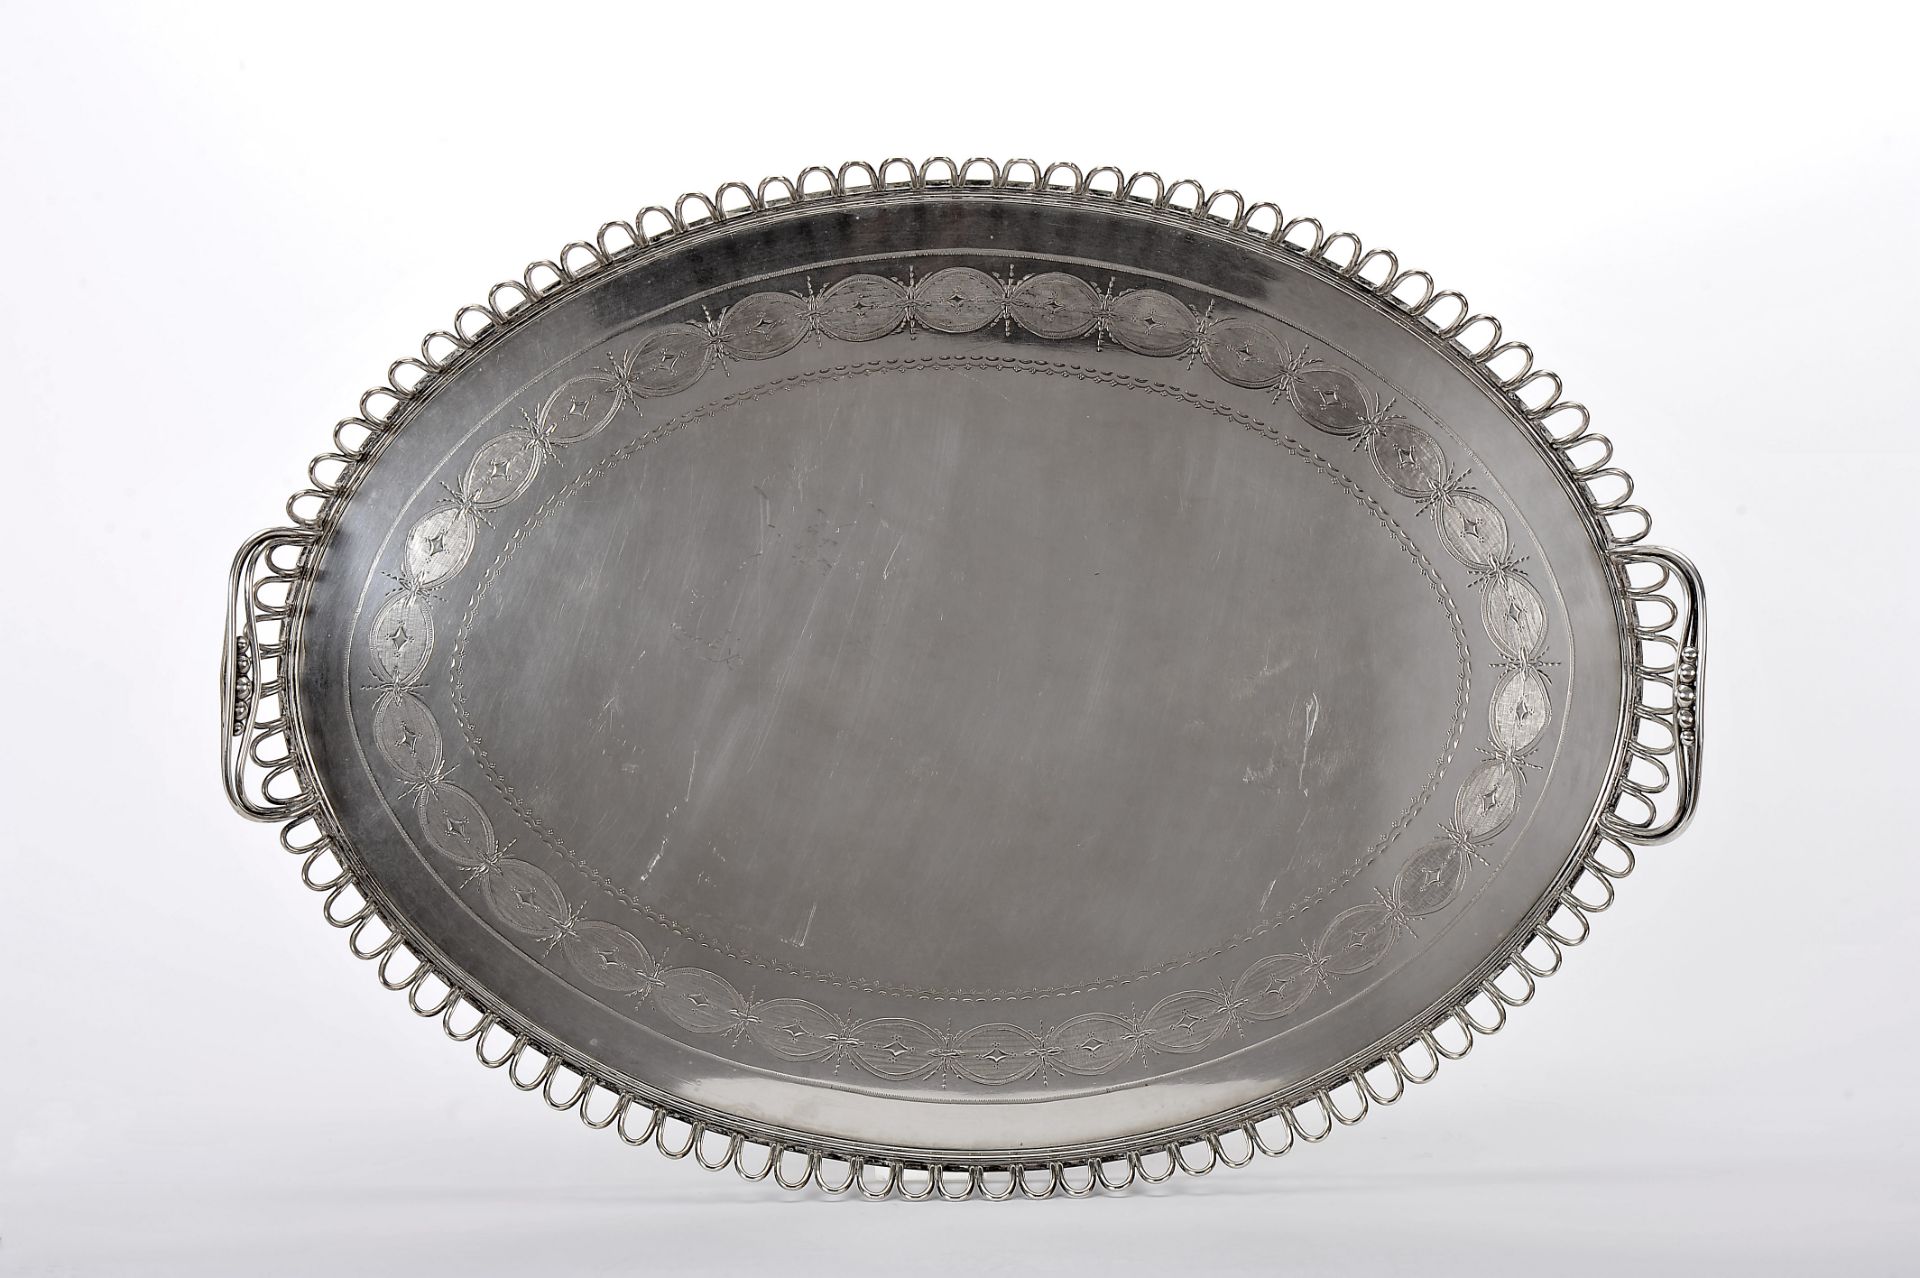 A two-handle oval tray with gallery - Image 2 of 3